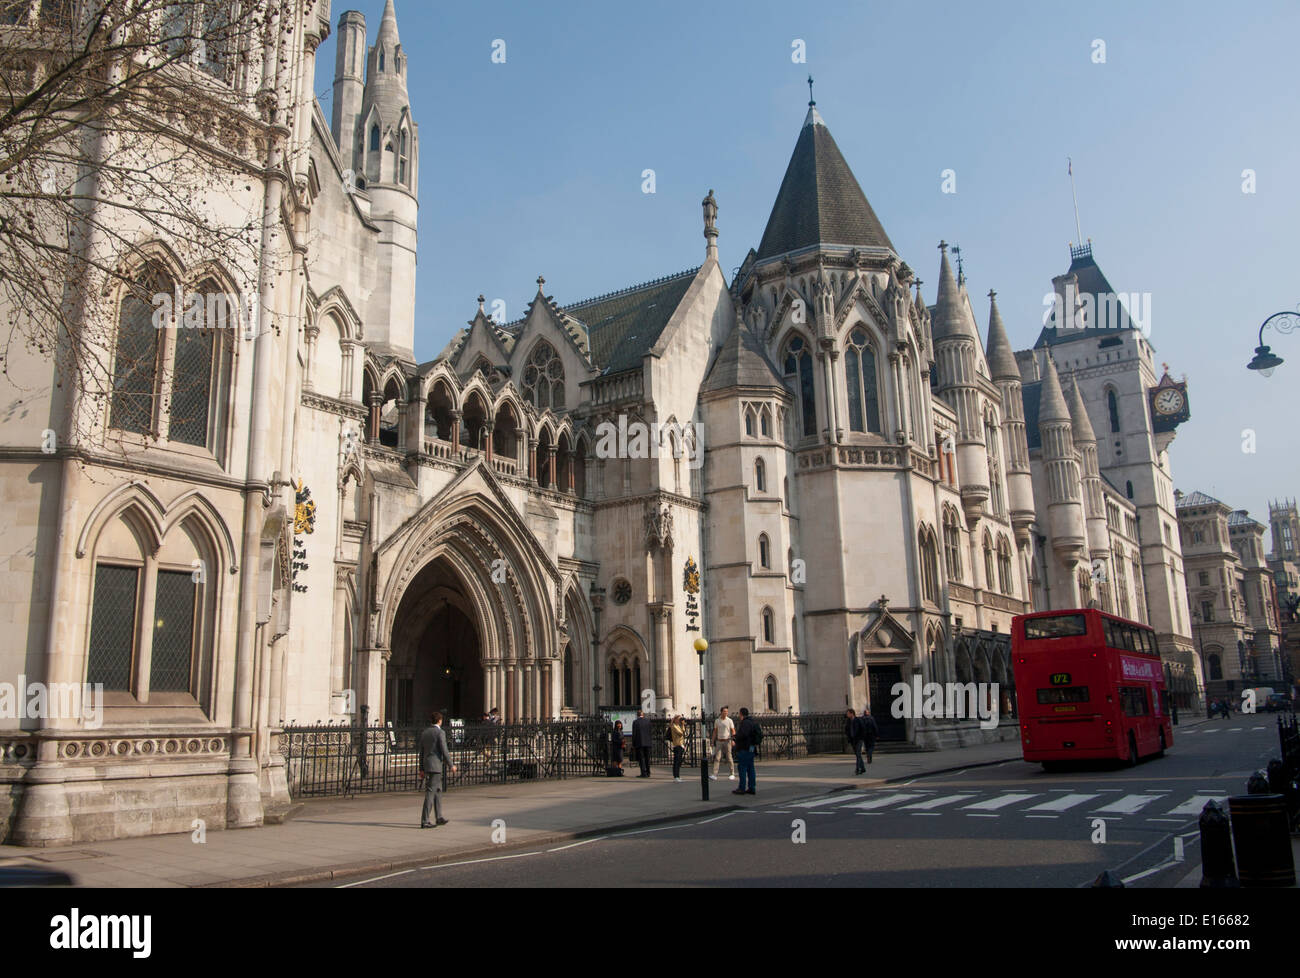 Royal Courts of Justice Fleet Street London England UK Banque D'Images